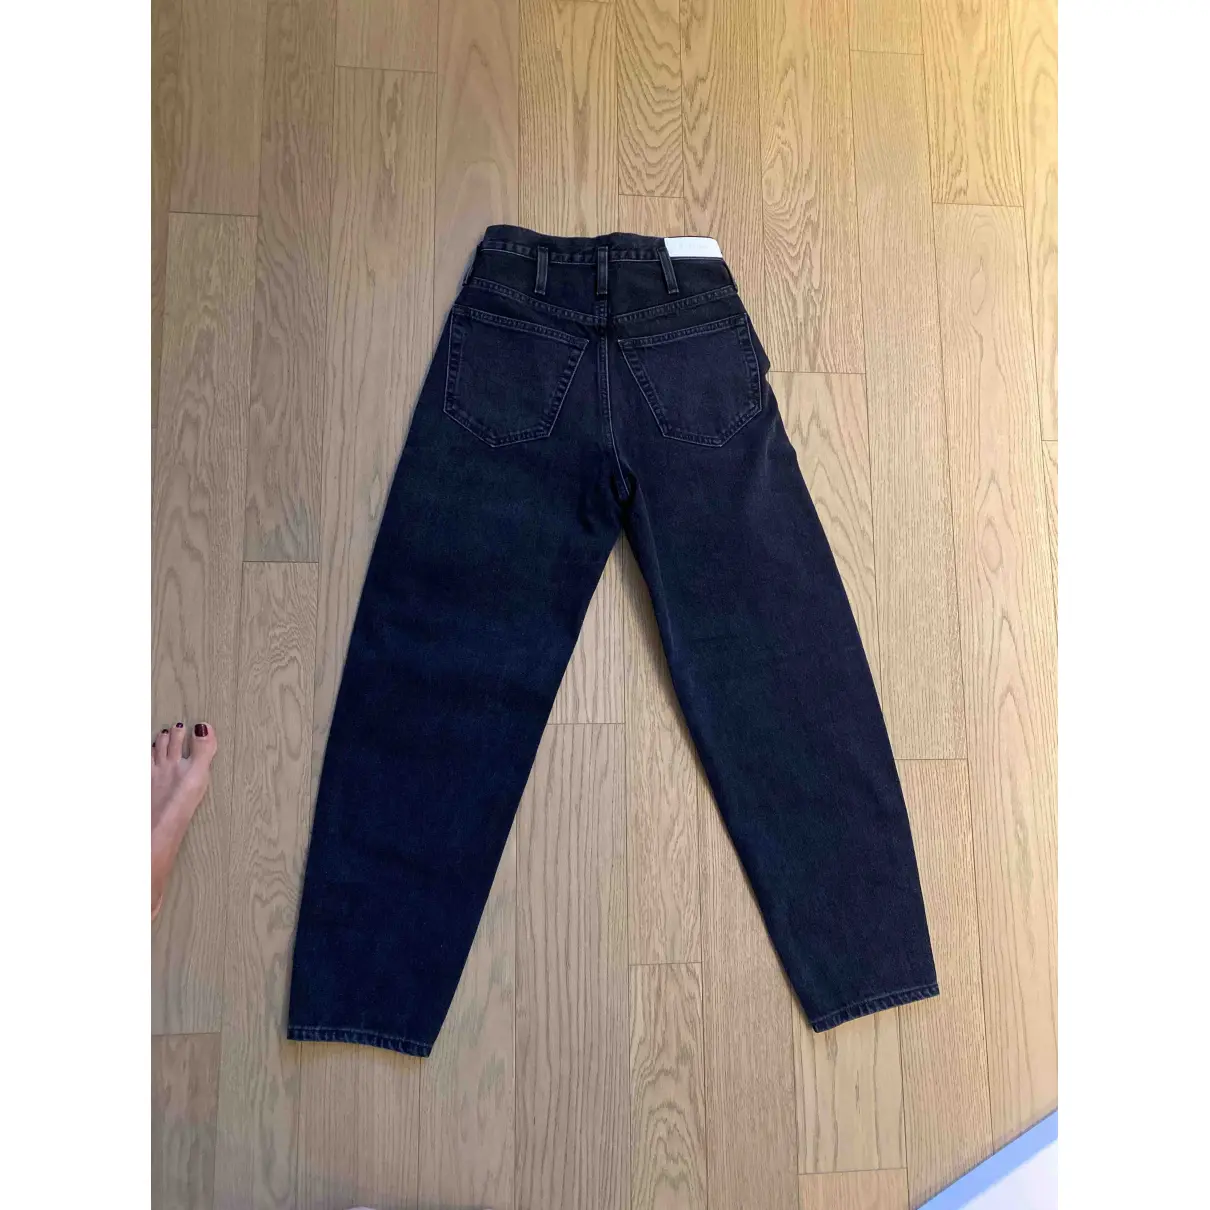 Buy Re/Done Jeans online